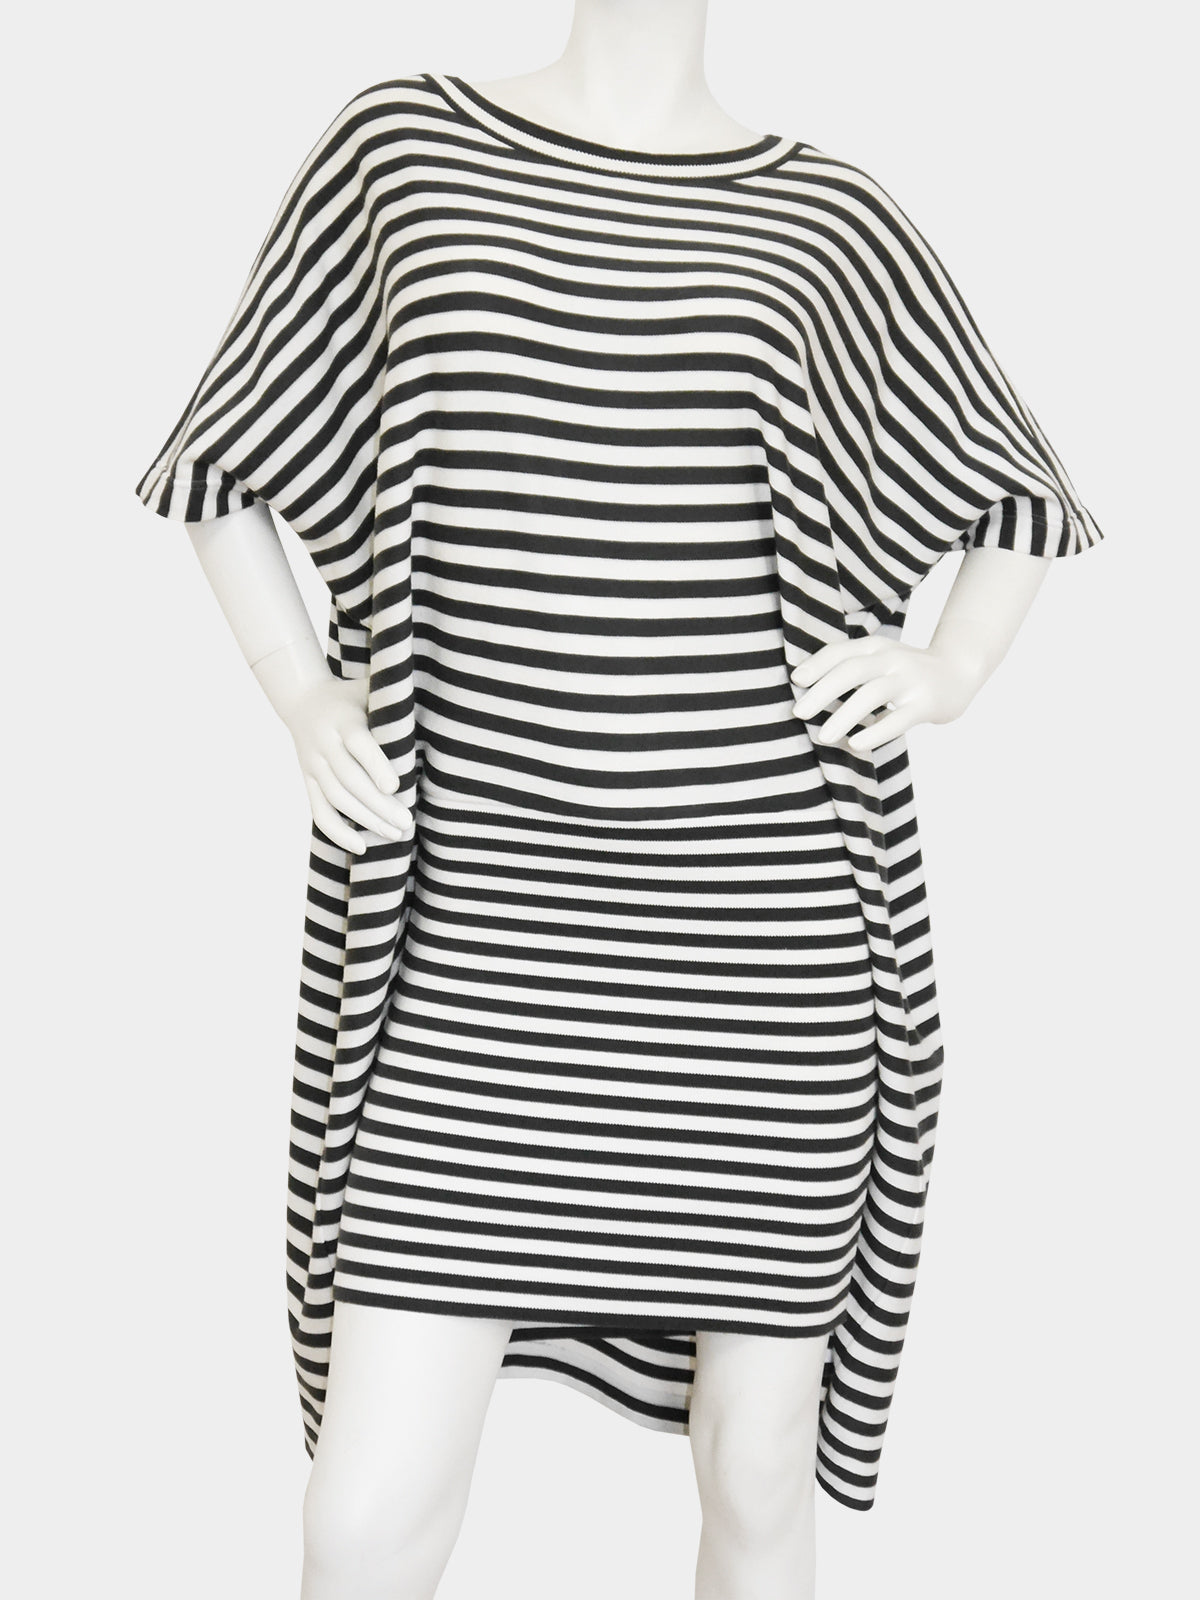 ISSEY MIYAKE c. 1985 Vintage Documented Striped "Two-in-One" Dress Size S